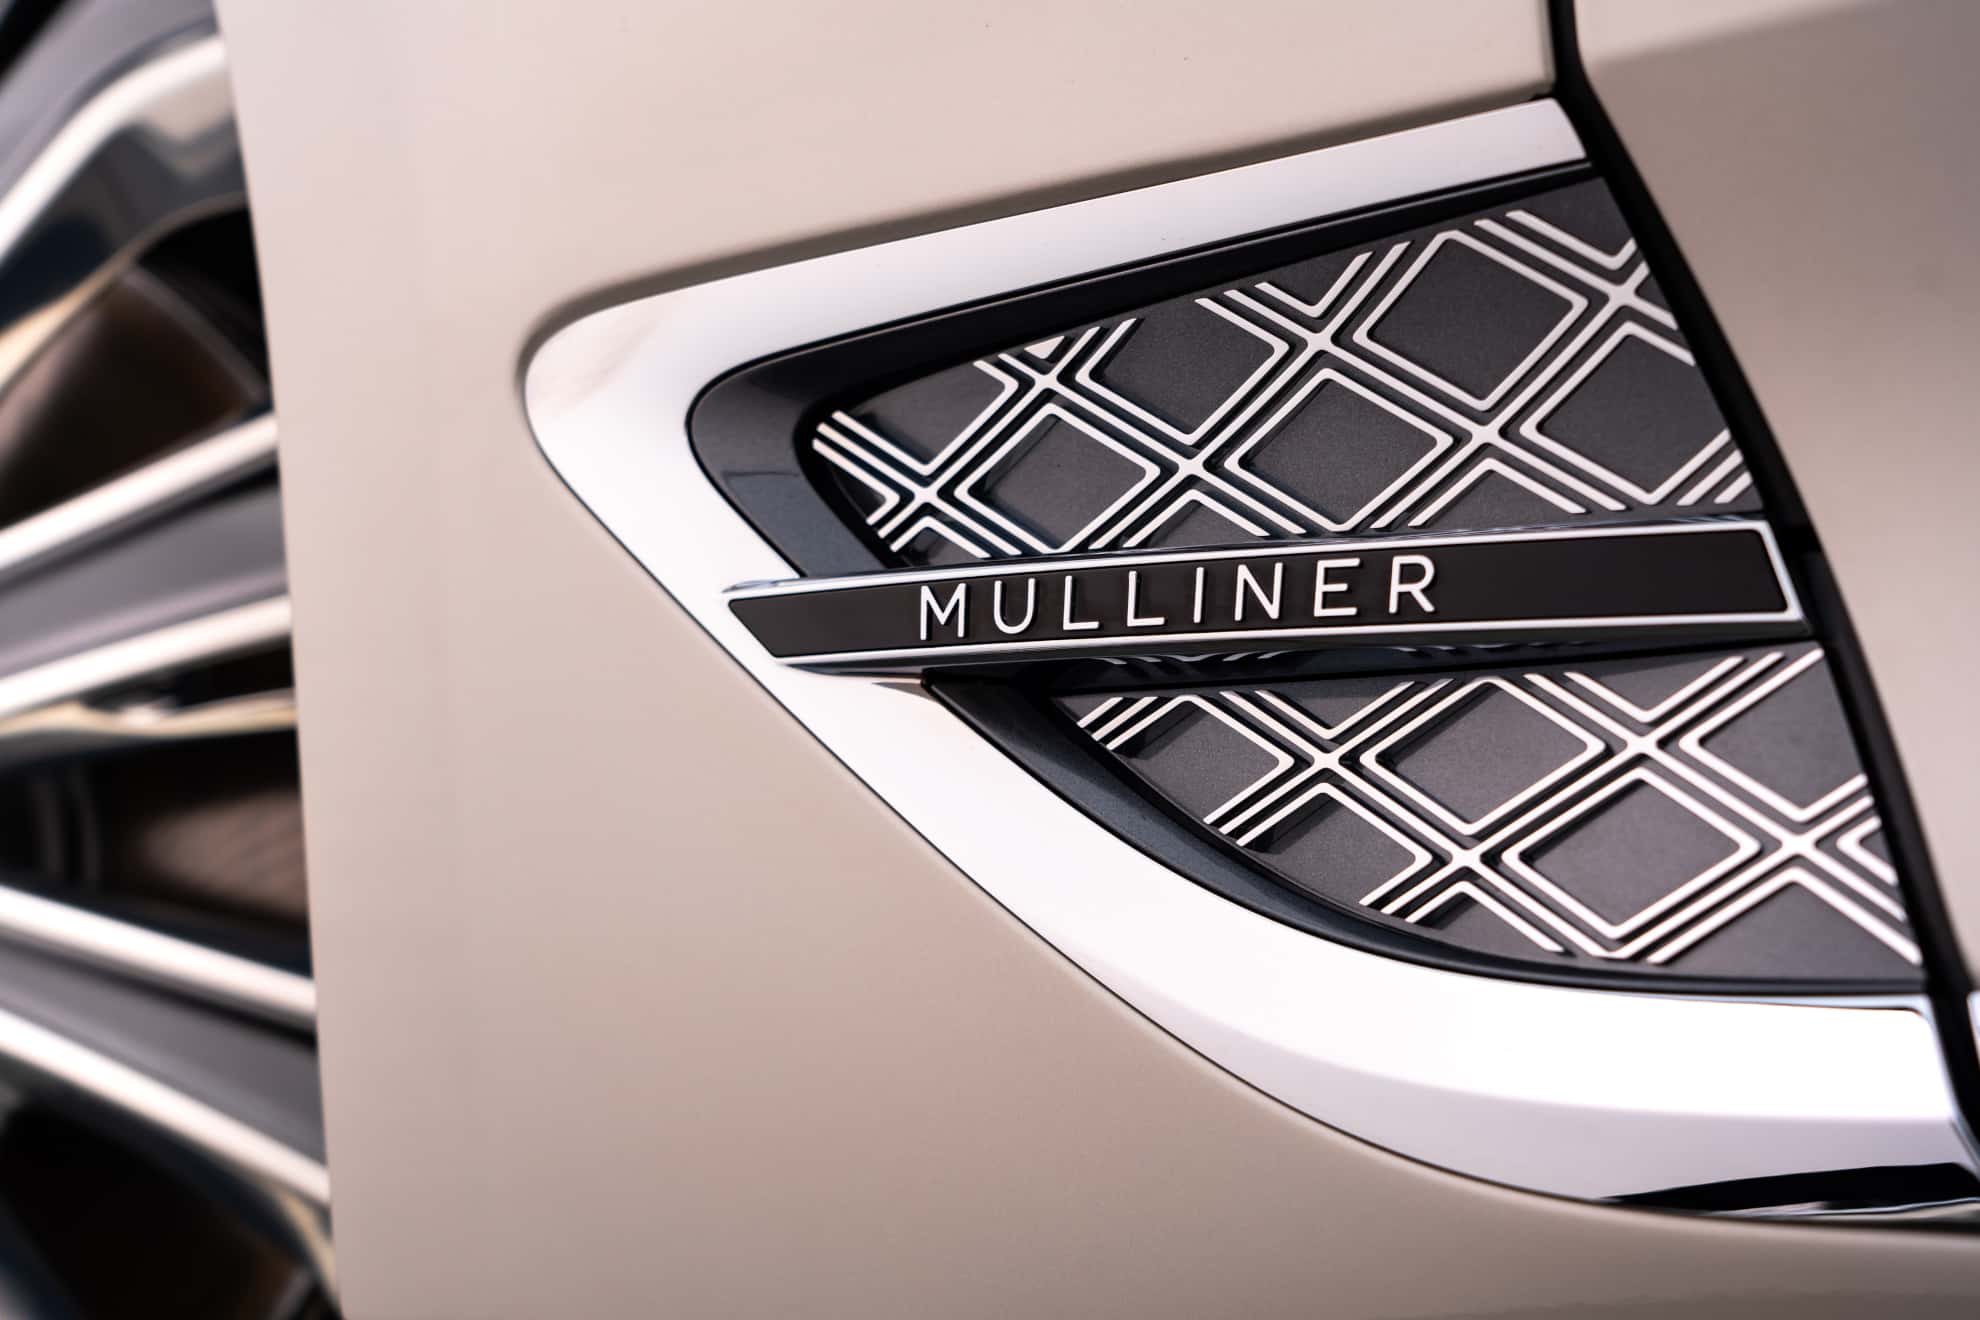 Bentley Continental GT Mulliner Coupe